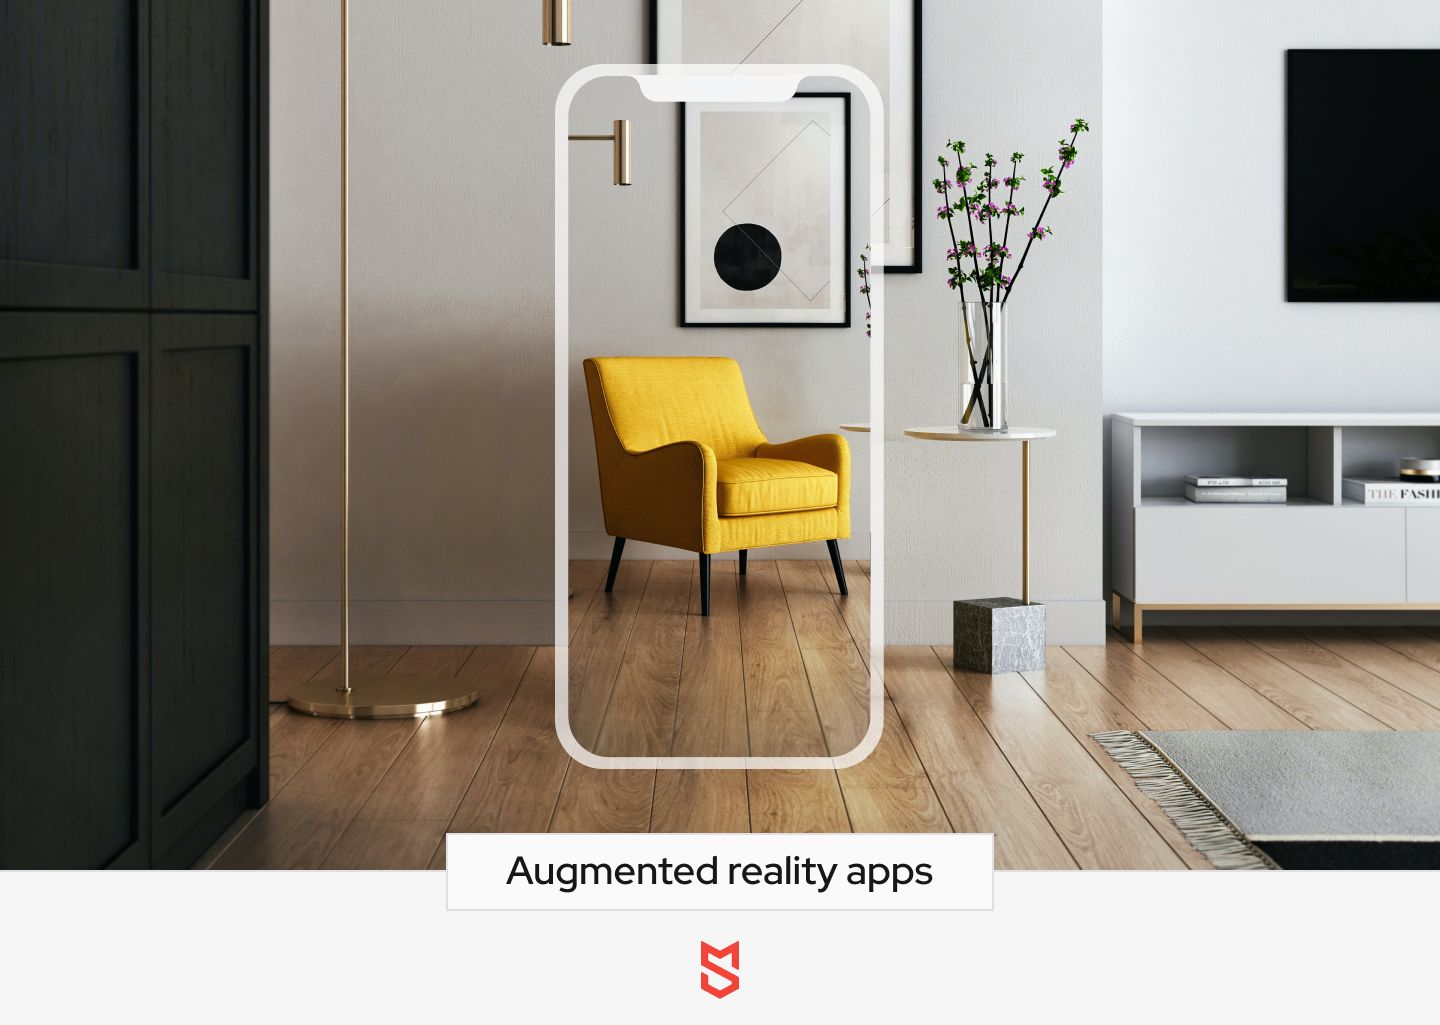 Augmented reality-enabled apps